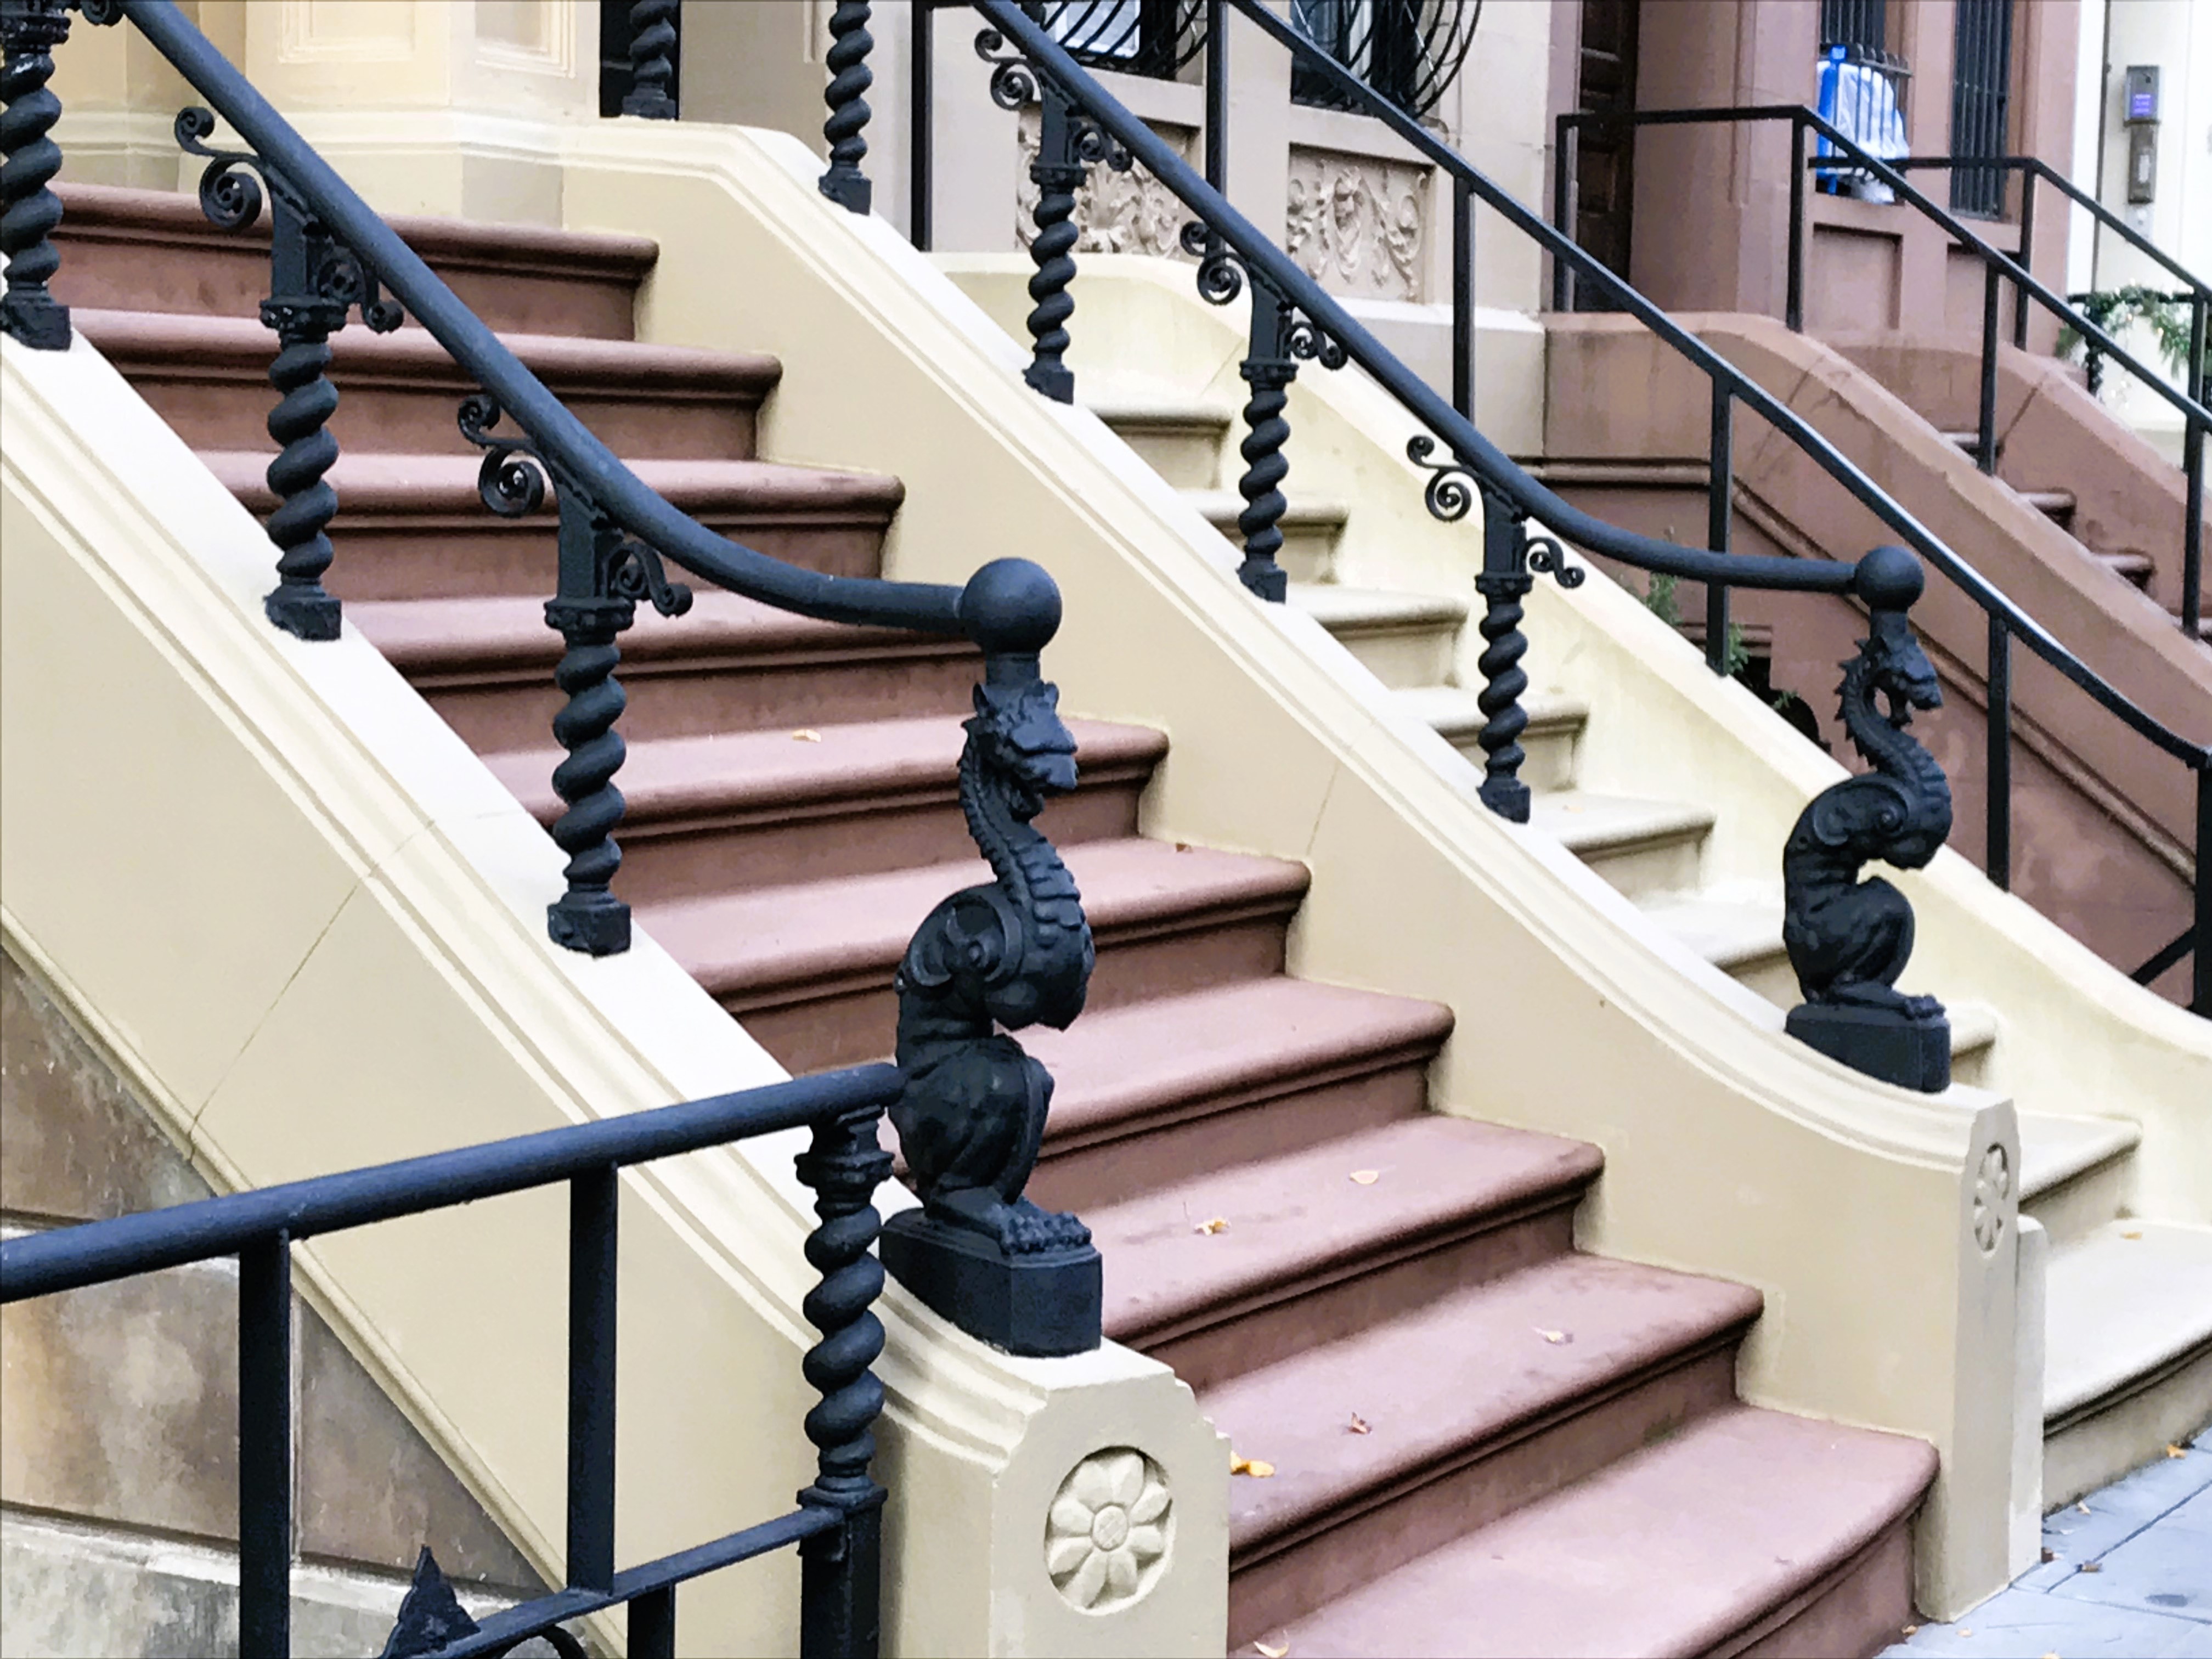 Downtown labeled staircase leading to the lower level of the pottery barn  in the flatiron district, Manhattan, NYC, USA Stock Photo - Alamy